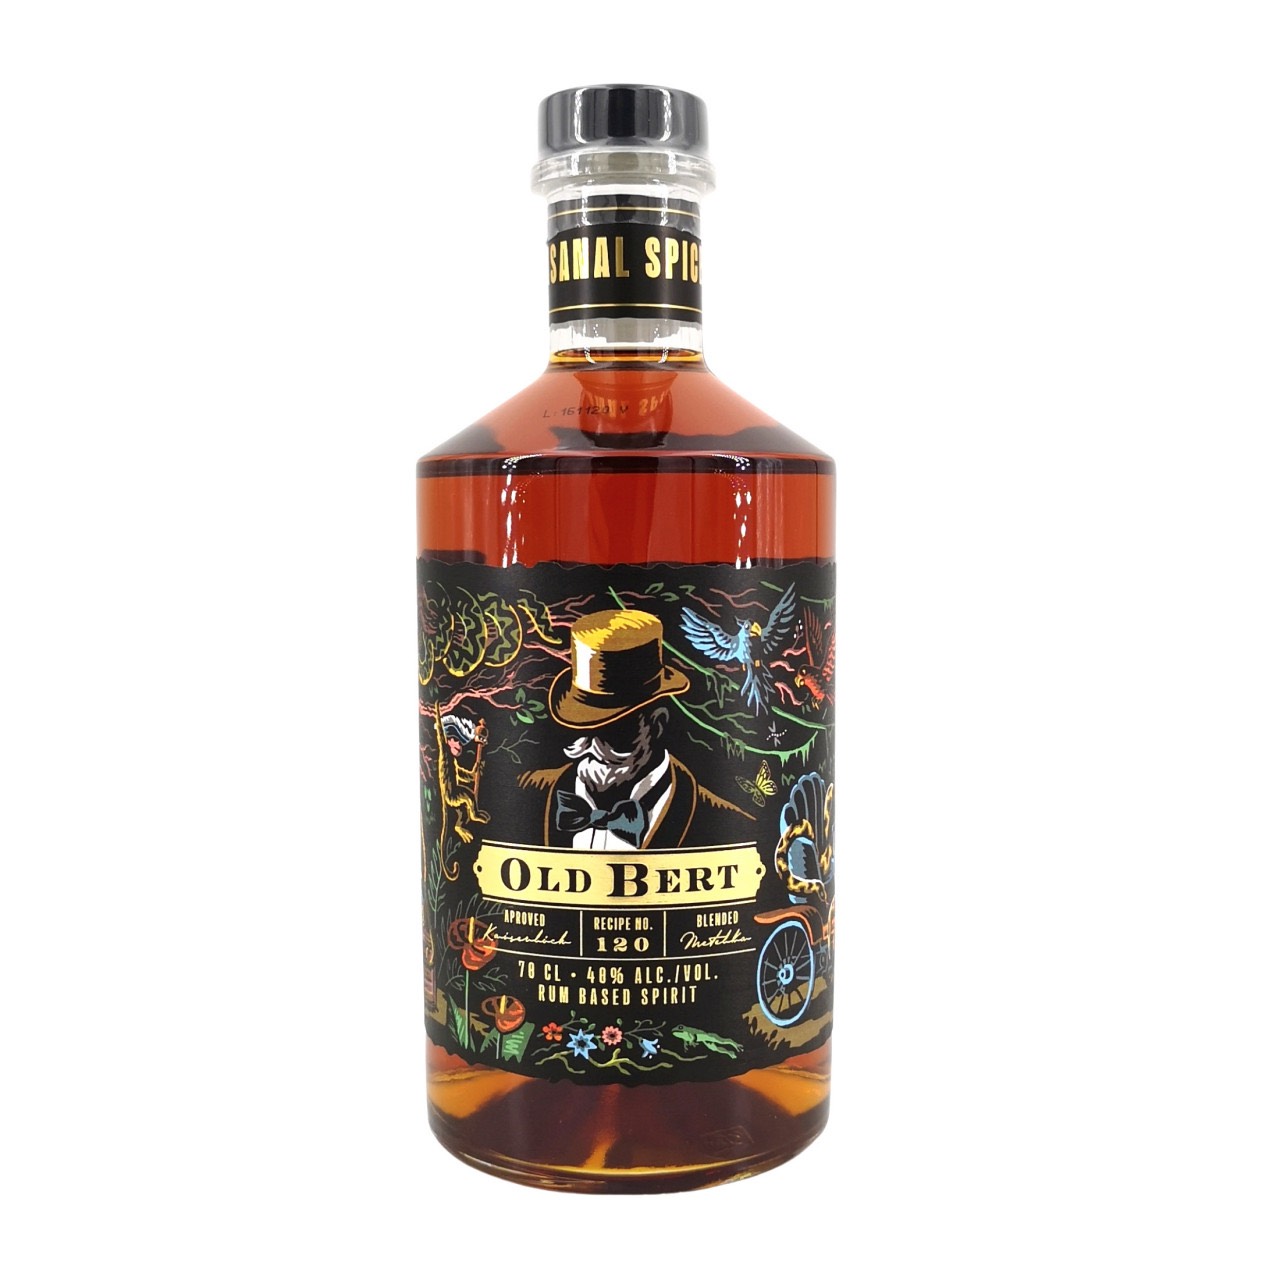 Bottle image of Old Bert Jamaican Spiced